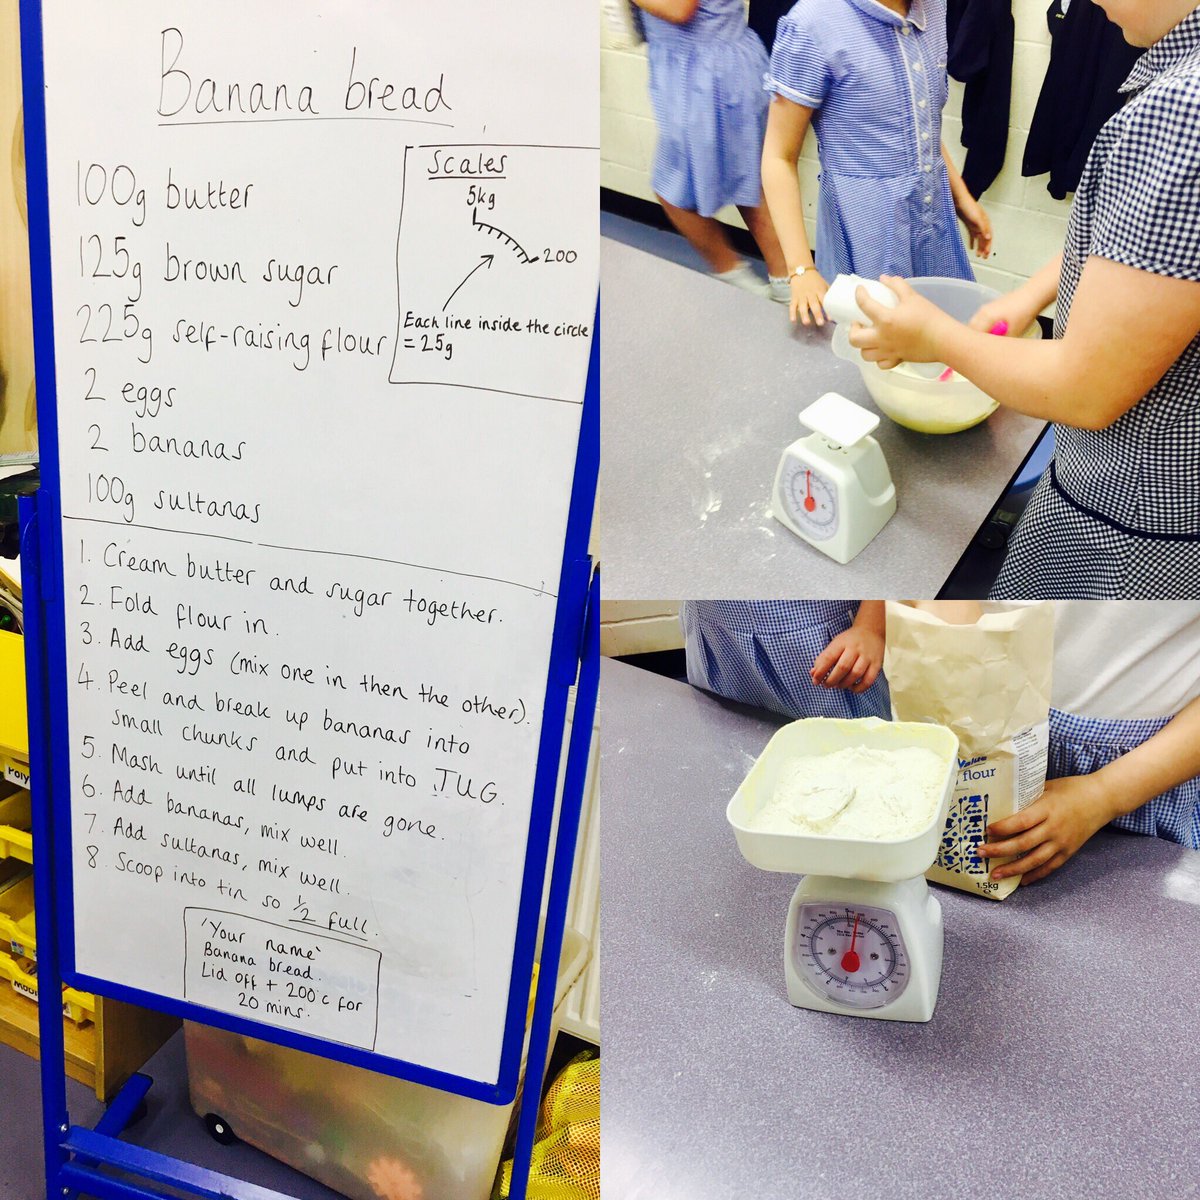 We are working in teams making Banana Bread with Y5 @NorthcoteSch ... one of my favourite recipes 🍌🐵 #baking #cookery #foodinschool